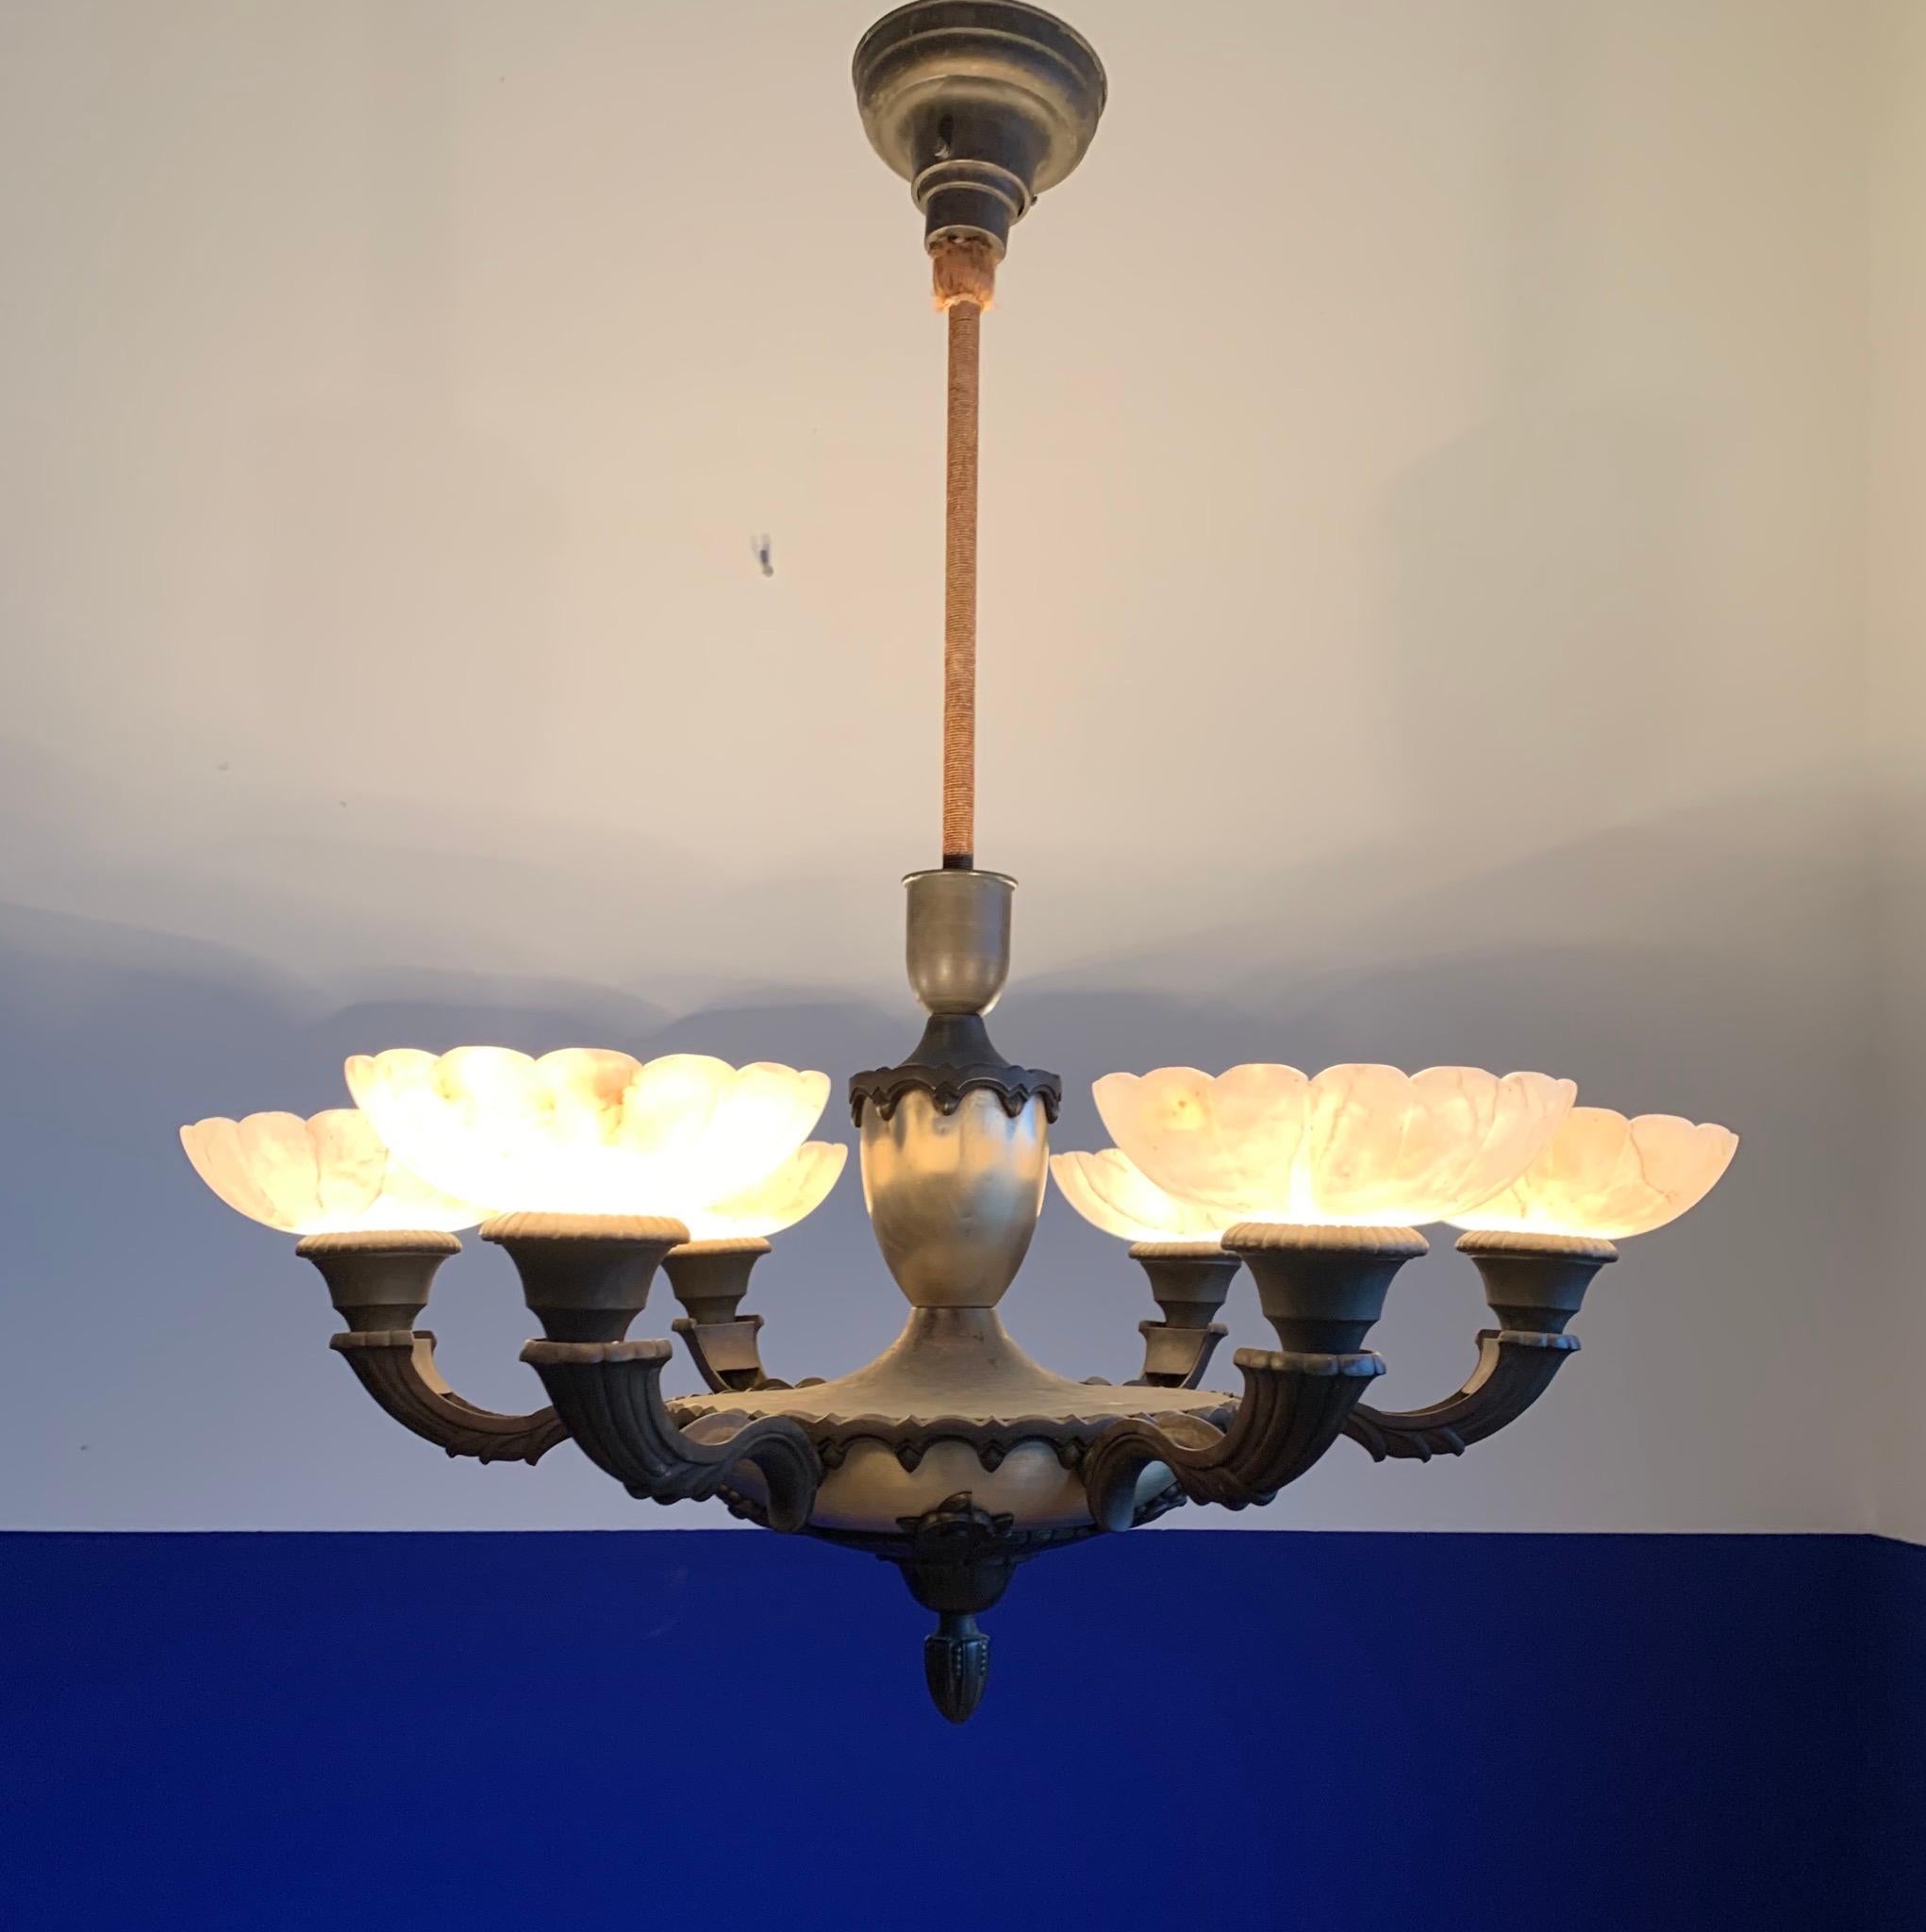 Stunning Art Deco pendant for a great atmosphere.

If you are looking for the perfect chandelier to grace your dining area then this truly stylish Art Deco light fixture could be yours to own and enjoy soon. The combination of the ancient patina of